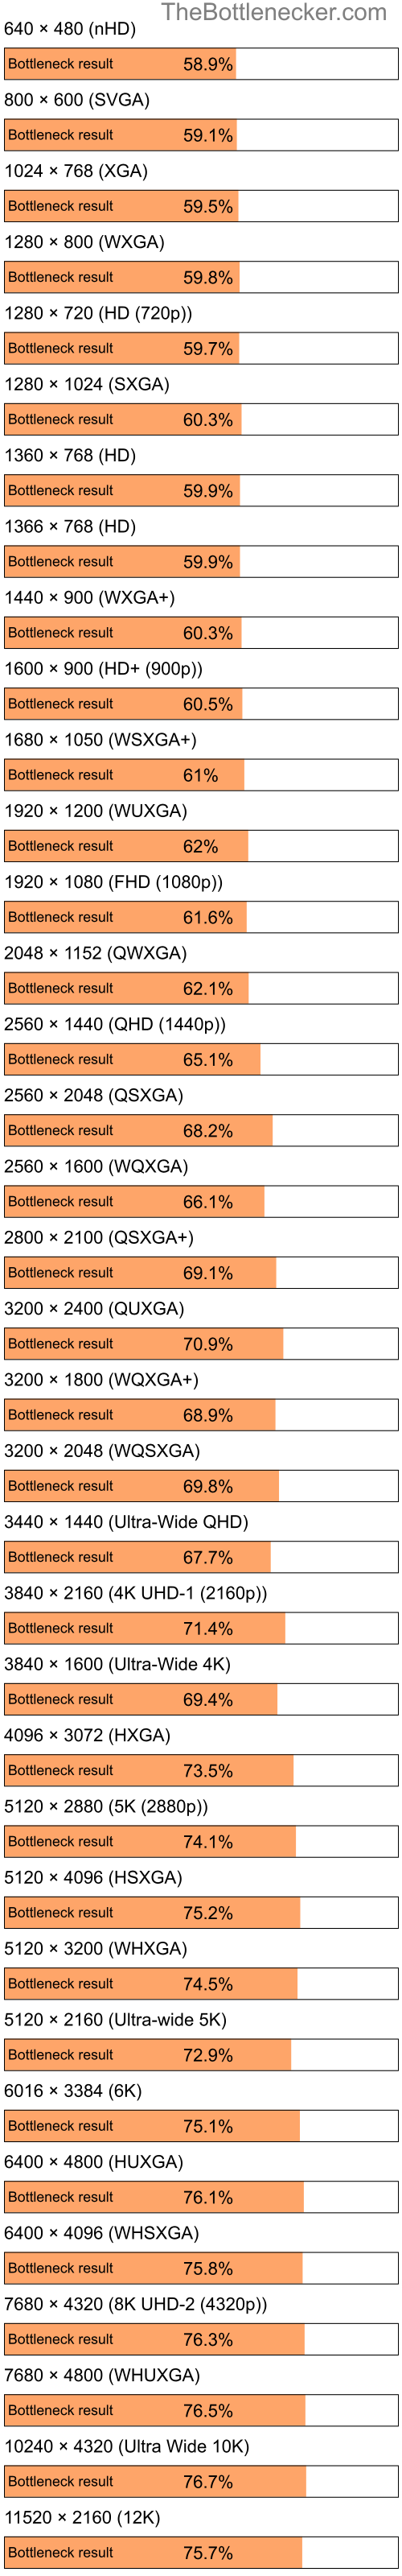 Bottleneck results by resolution for Intel Atom Z520 and AMD Radeon HD 4270 in General Tasks